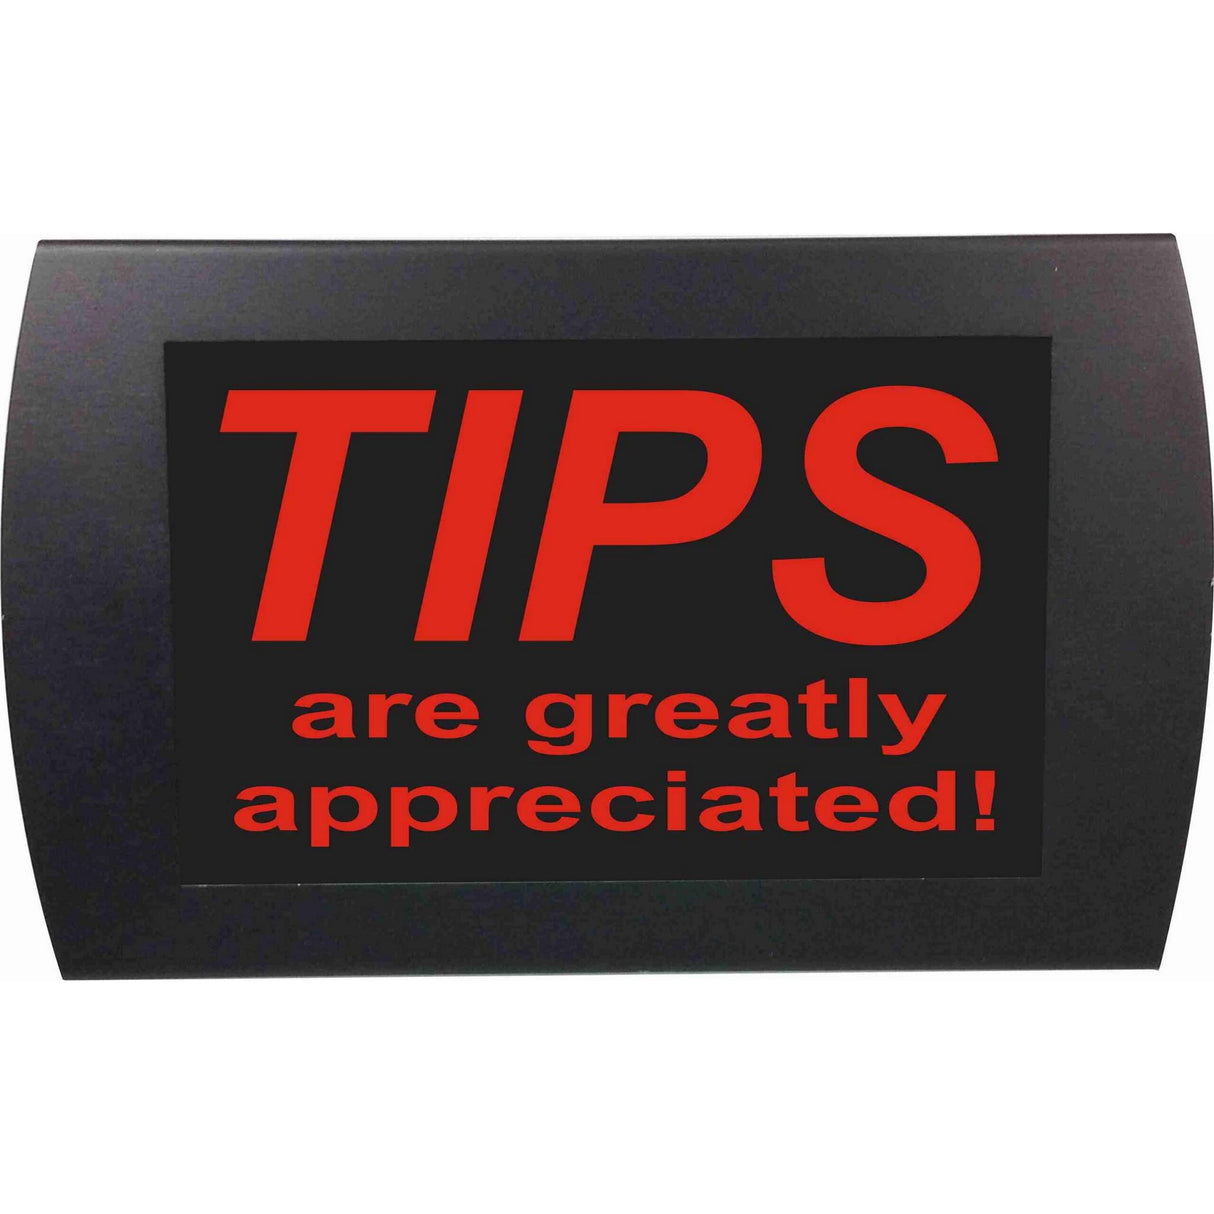 American Recorder OAS-2030M-RD "TIPS GREATLY APPRECIATED" LED Lighted Sign, Red